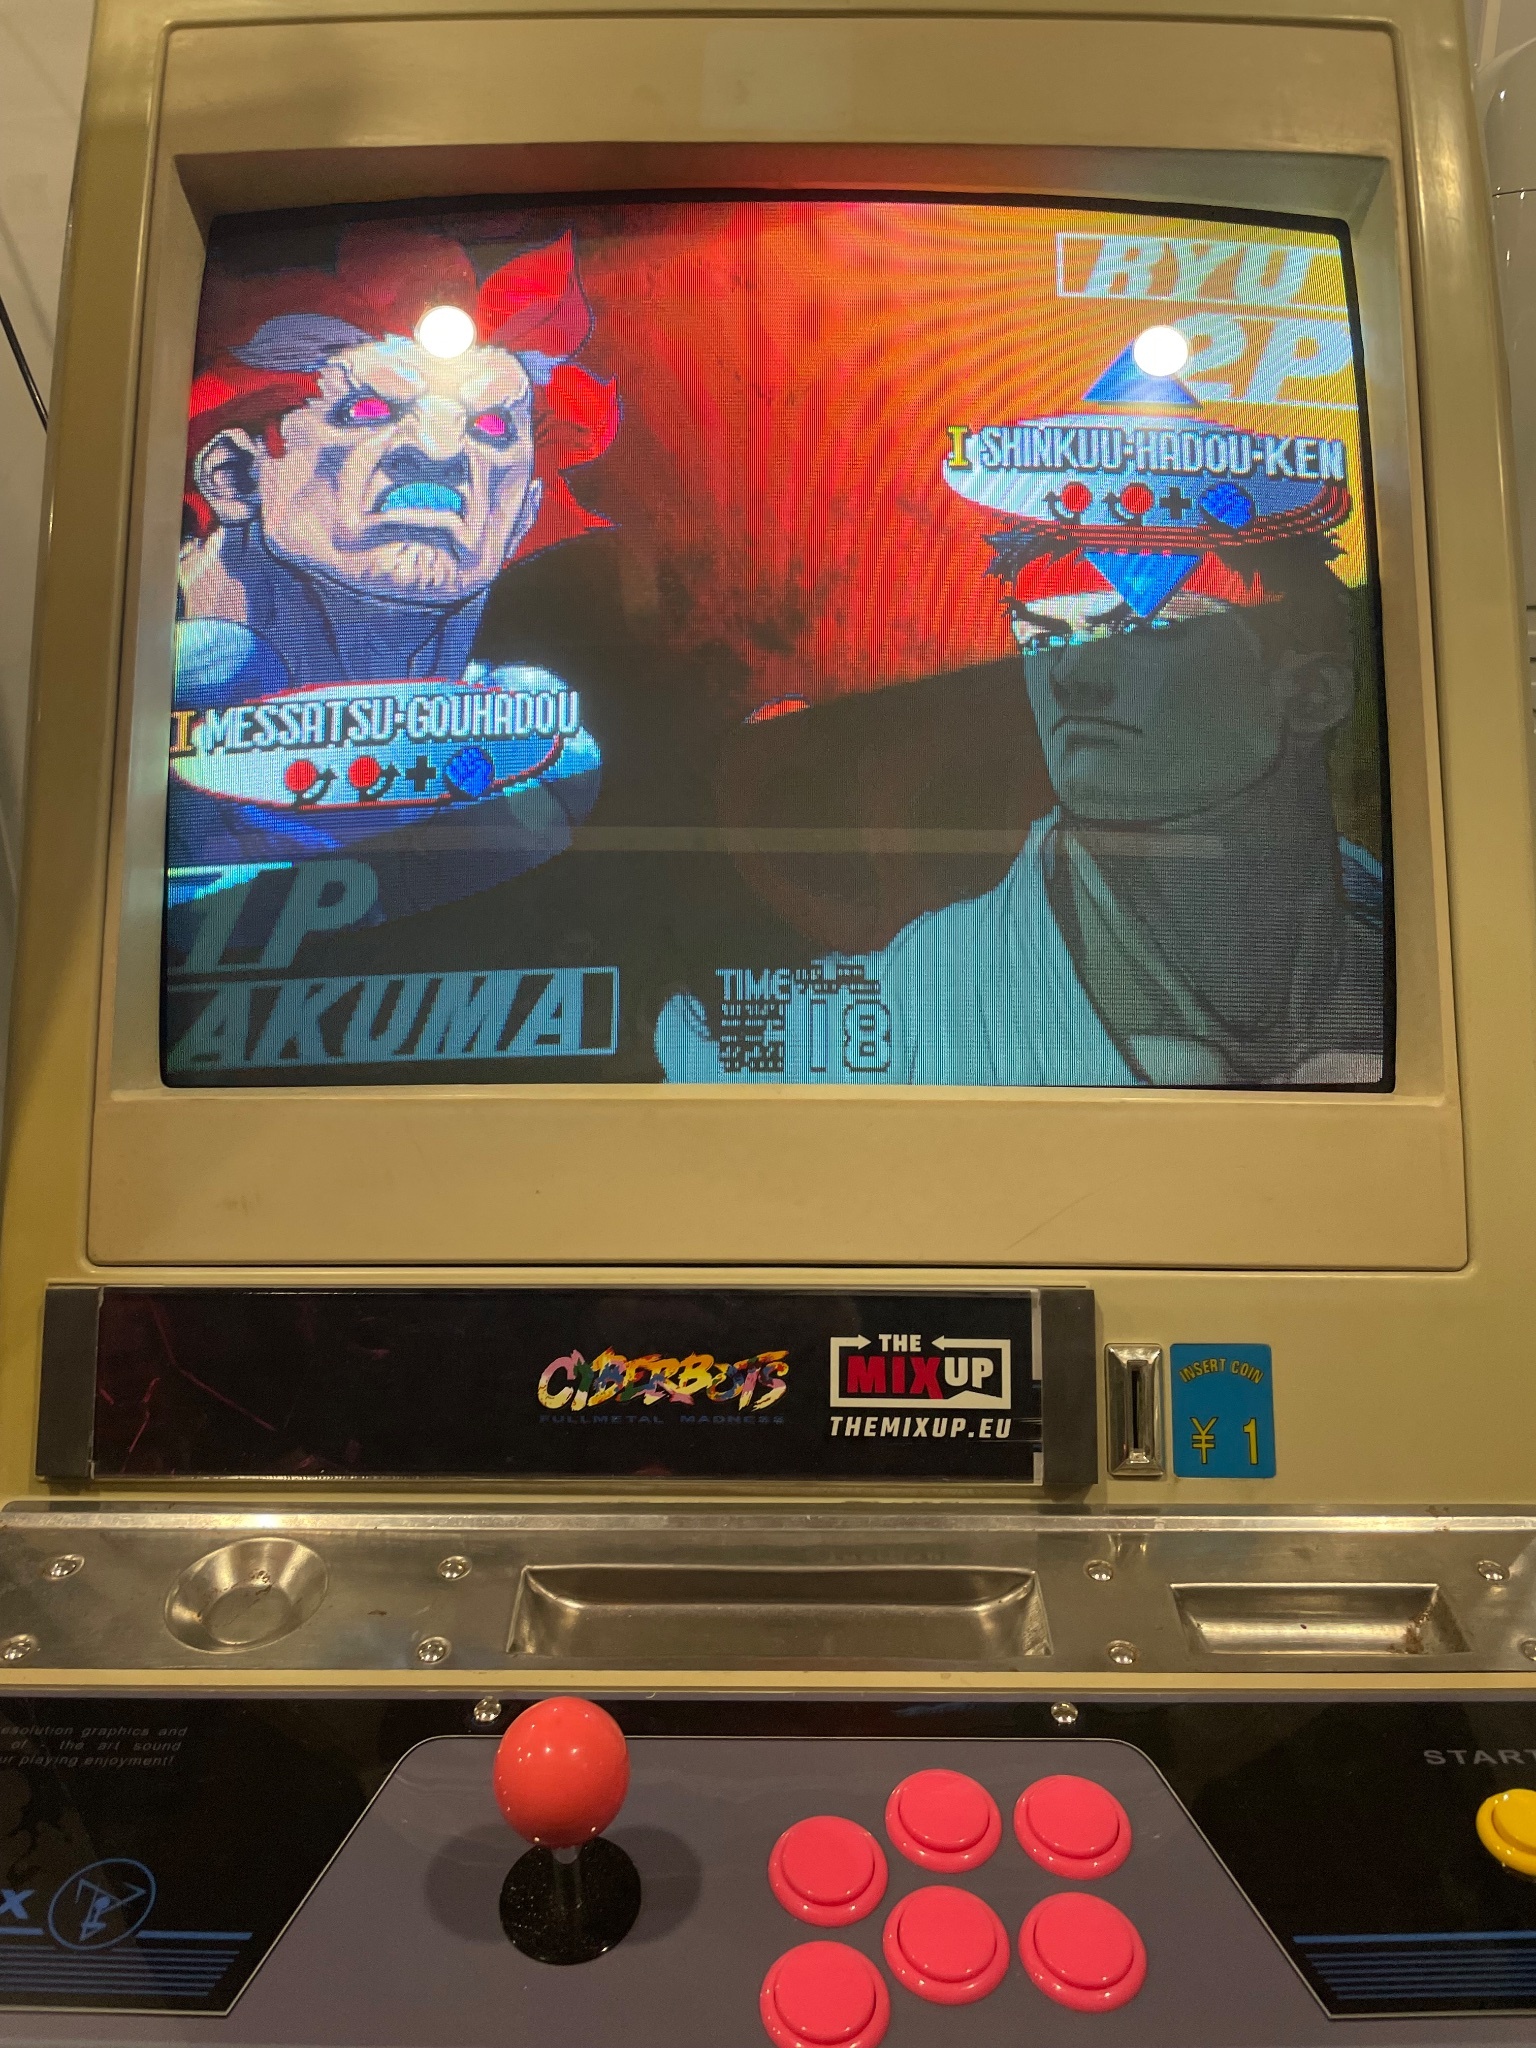 The screen of an arcade cab with Street Fighter playing.